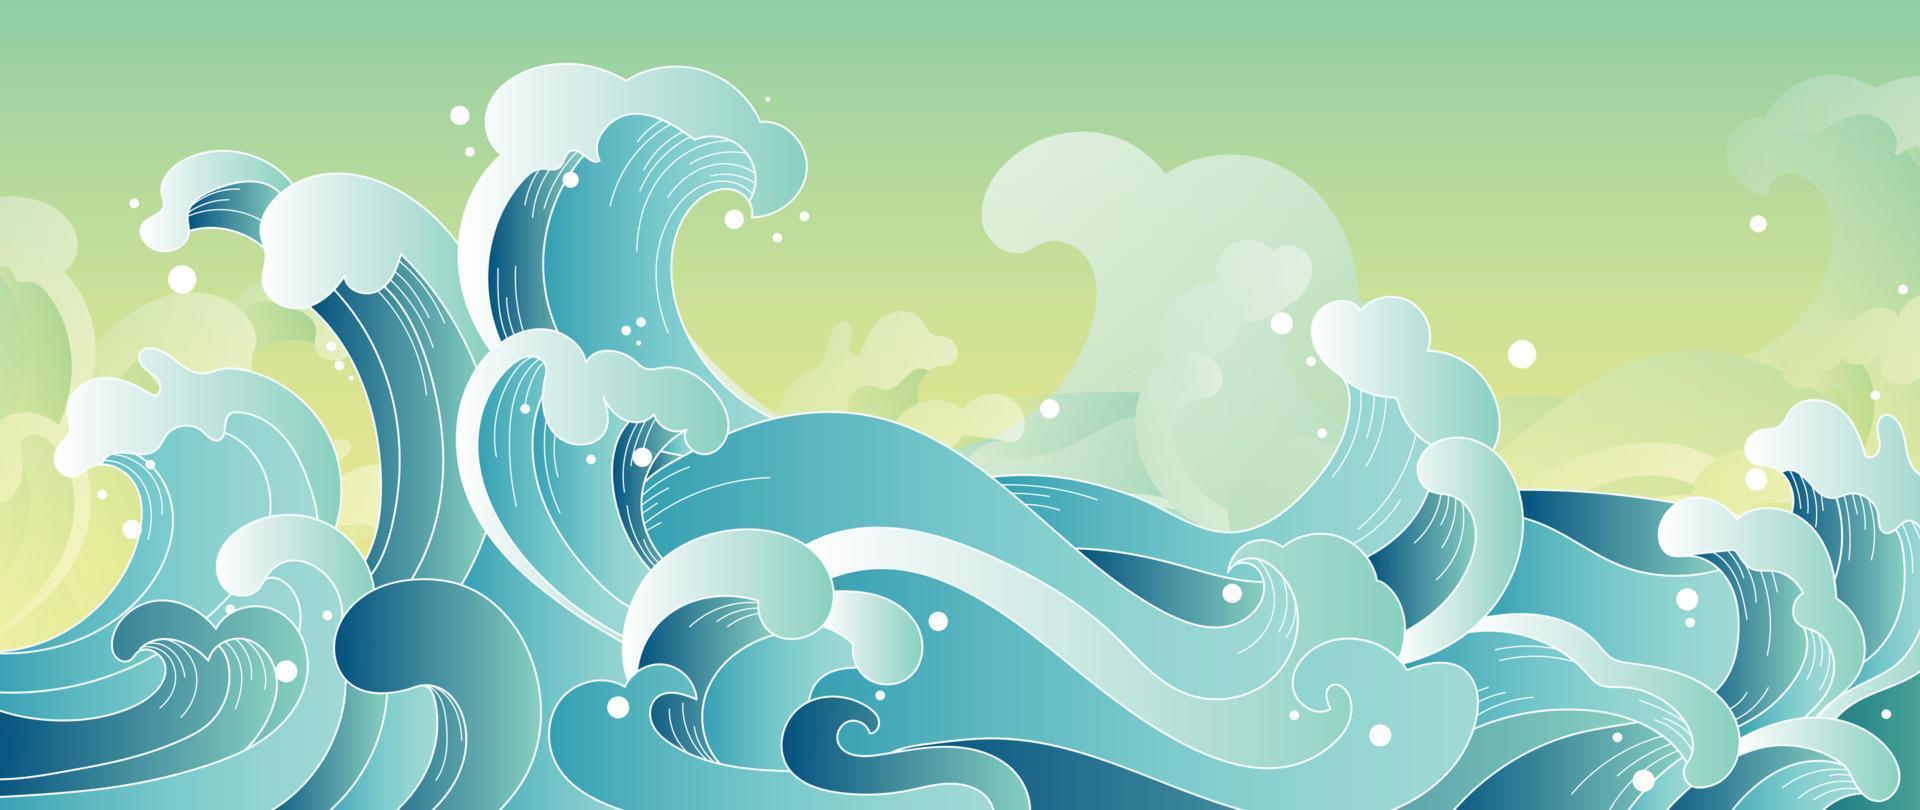 Traditional Japanese wave pattern vector. Elegant hand drawn oriental ocean wave abstract pattern style background. Art design illustration for prints, fabric, poster, home decoration and wallpaper. vector